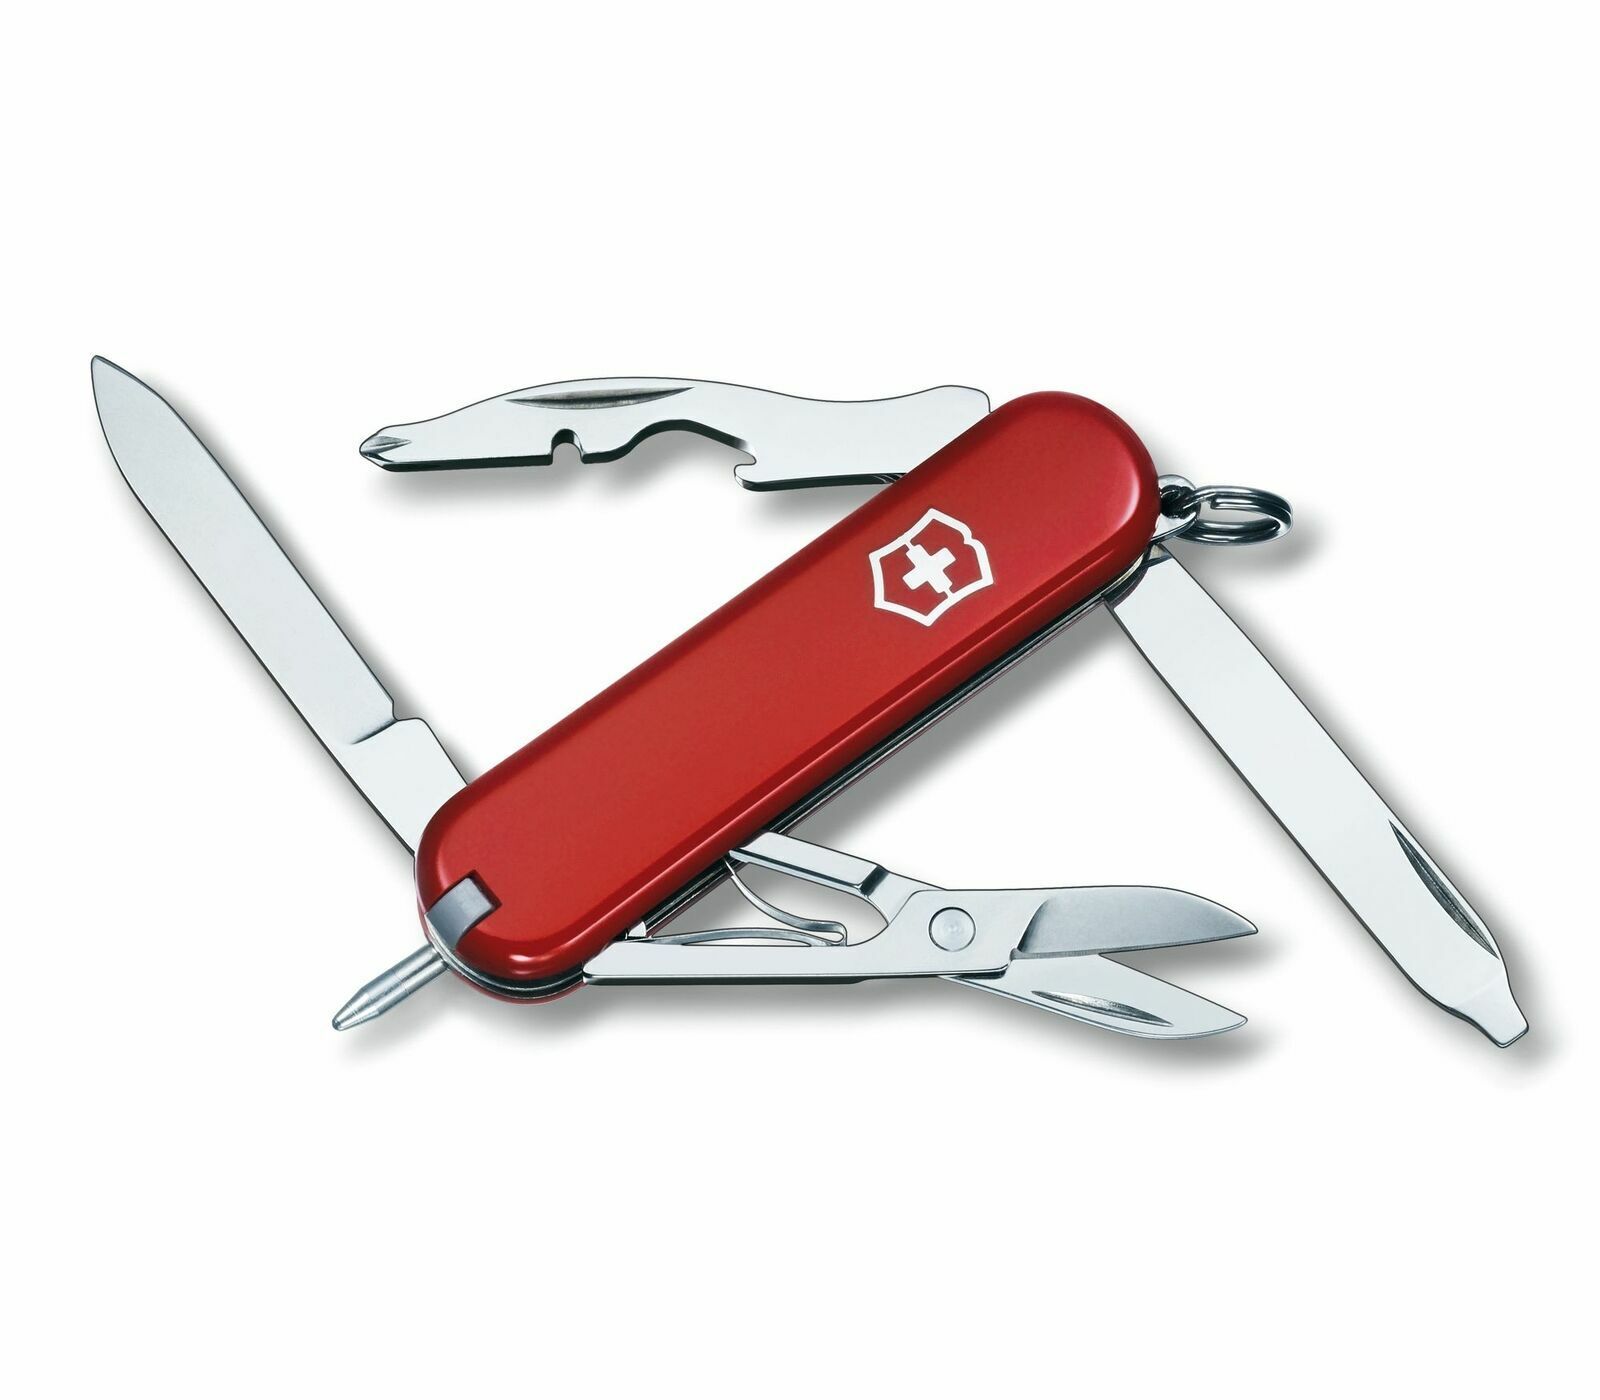 NEW in Box Victorinox Swiss Army 58mm Knife  RED MANAGER  0.6365